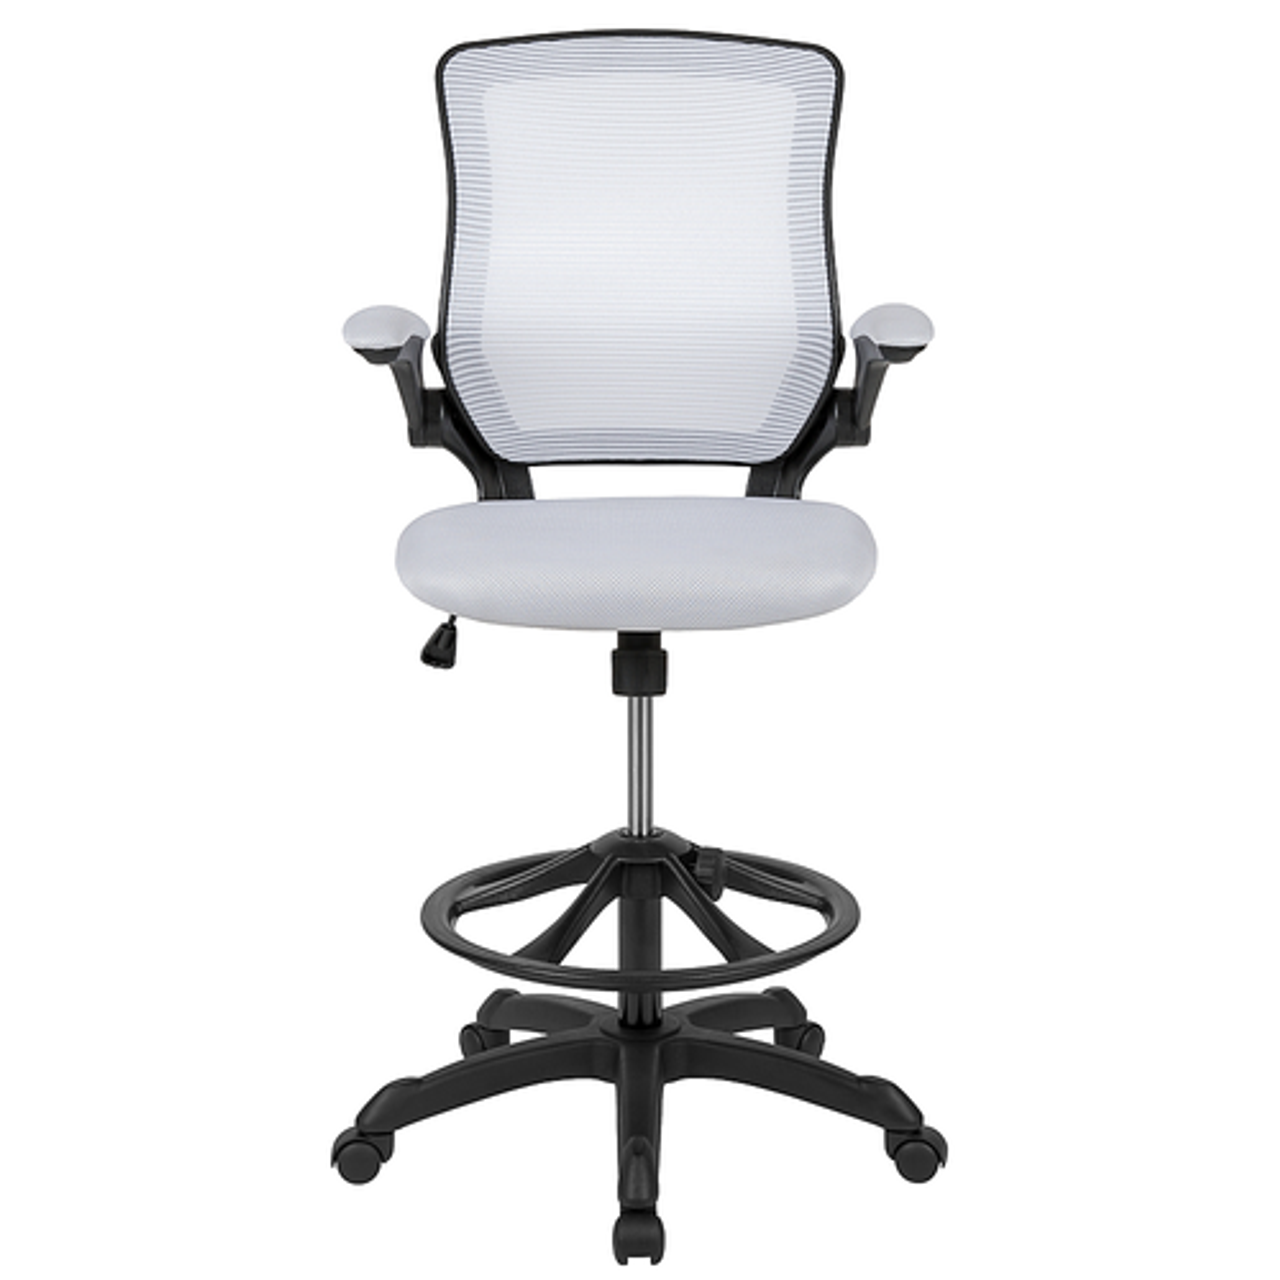 Flash Furniture - Mid-Back Mesh Ergonomic Drafting Chair with Adjustable Foot Ring and Flip-Up Arms - White